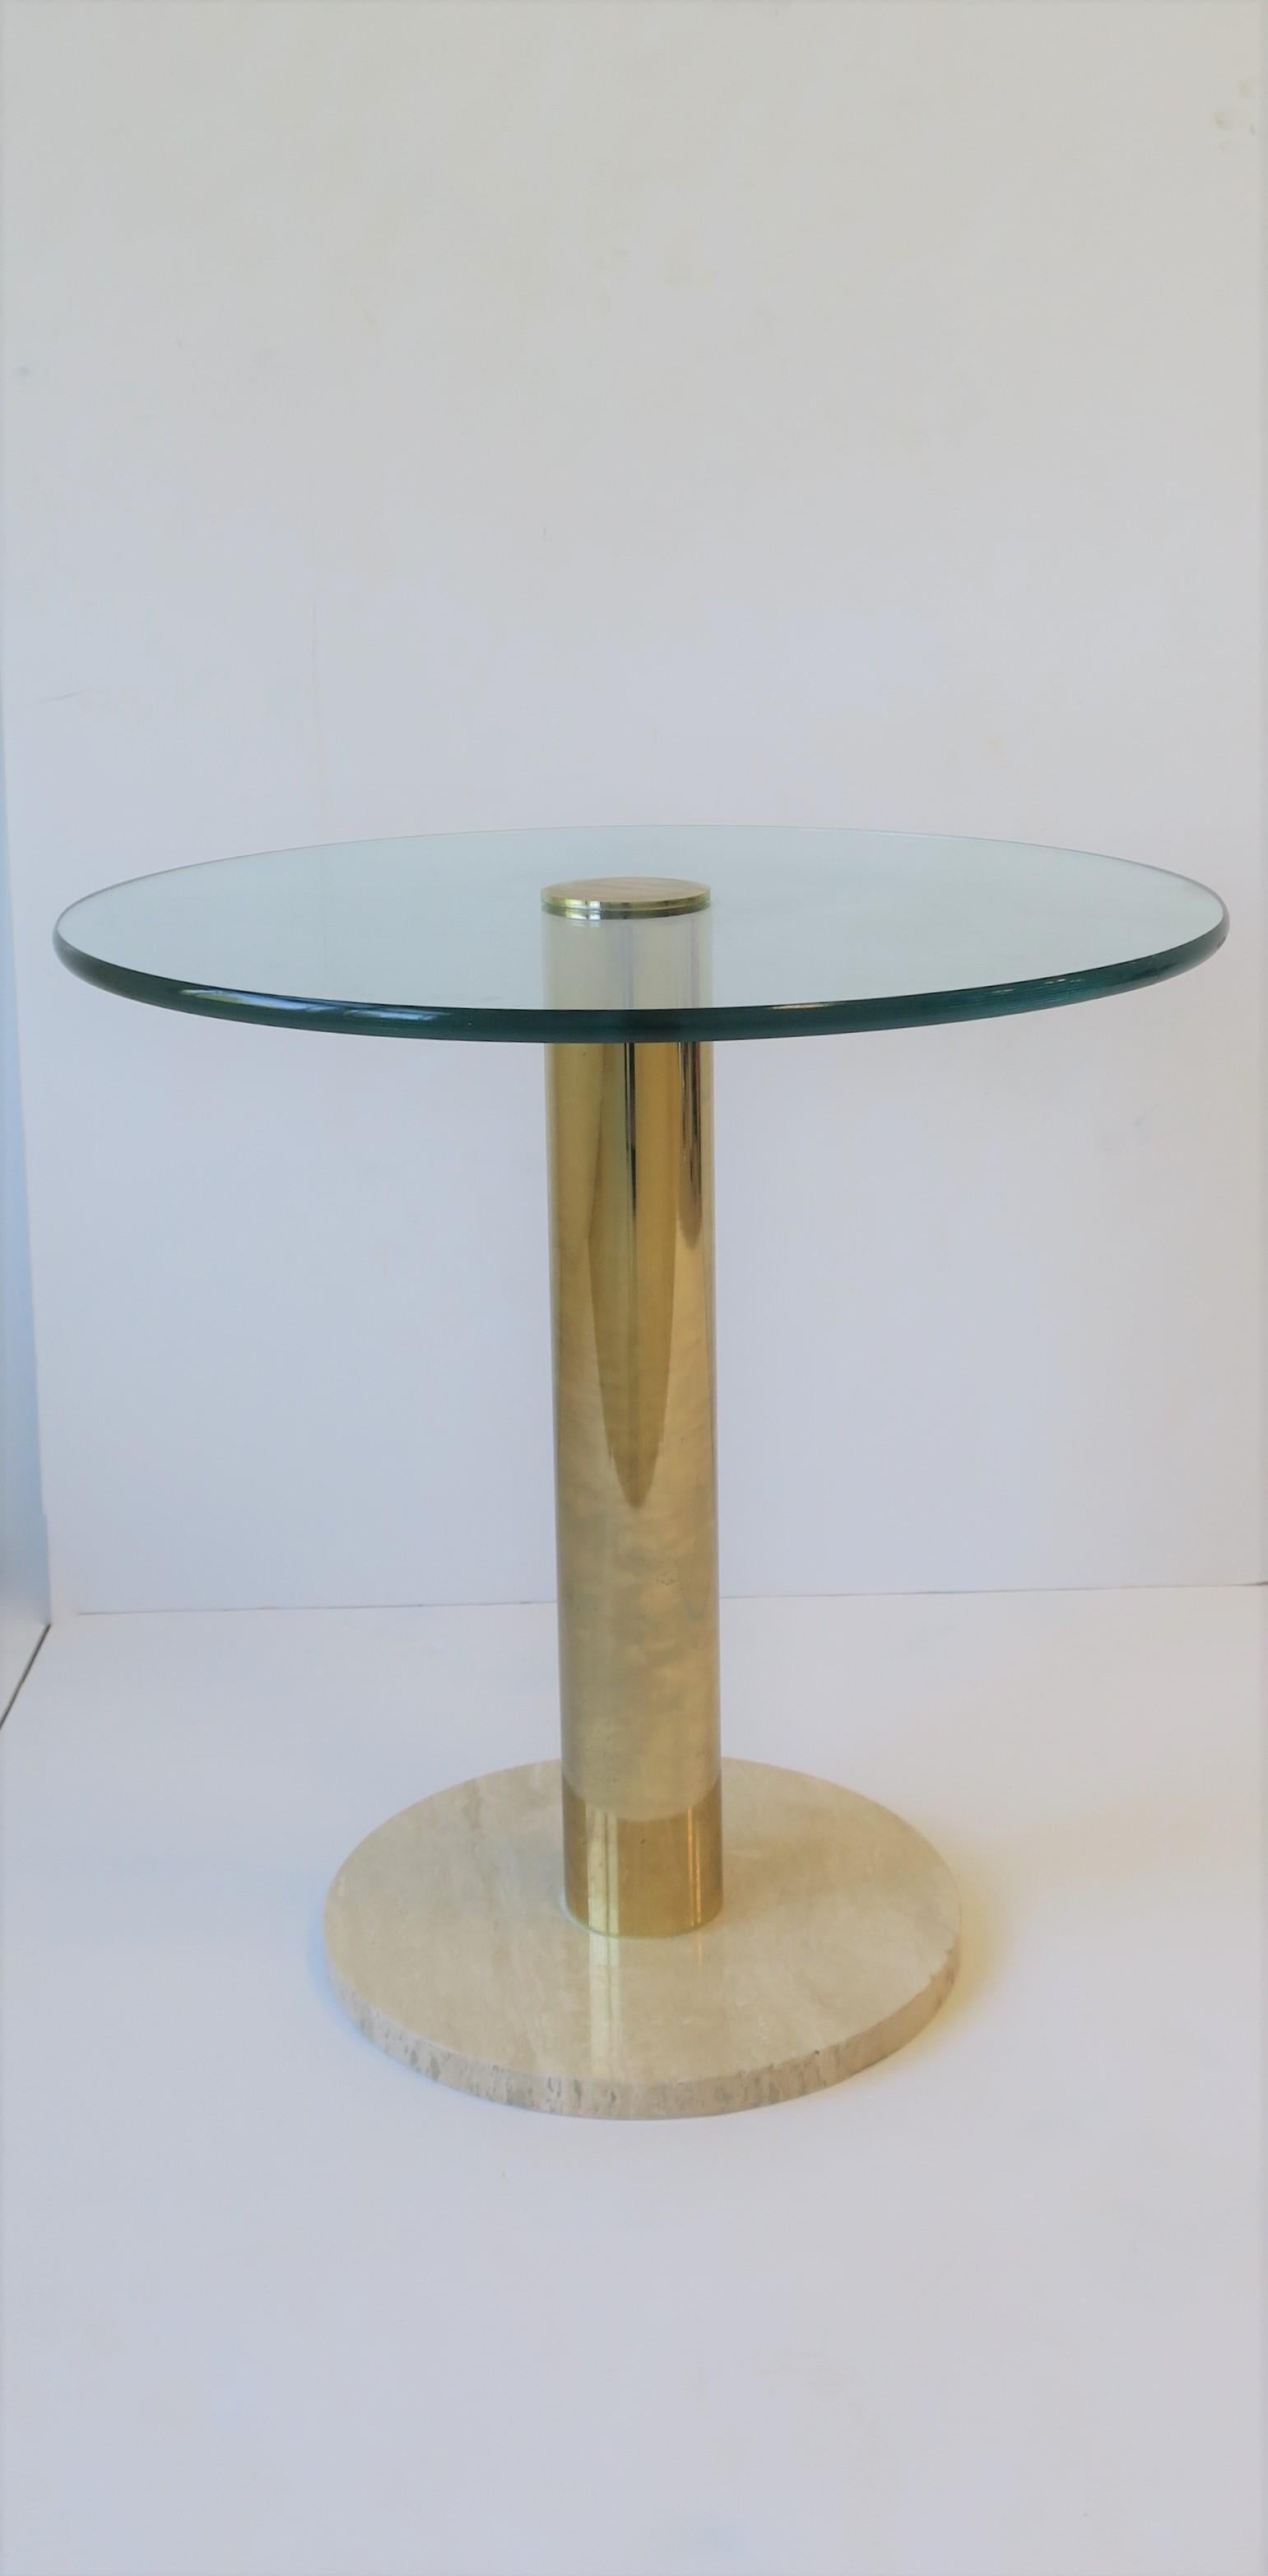 A chic 1970 modern Italian round brass and glass side or drinks table with travertine marble base. Glass top is .50